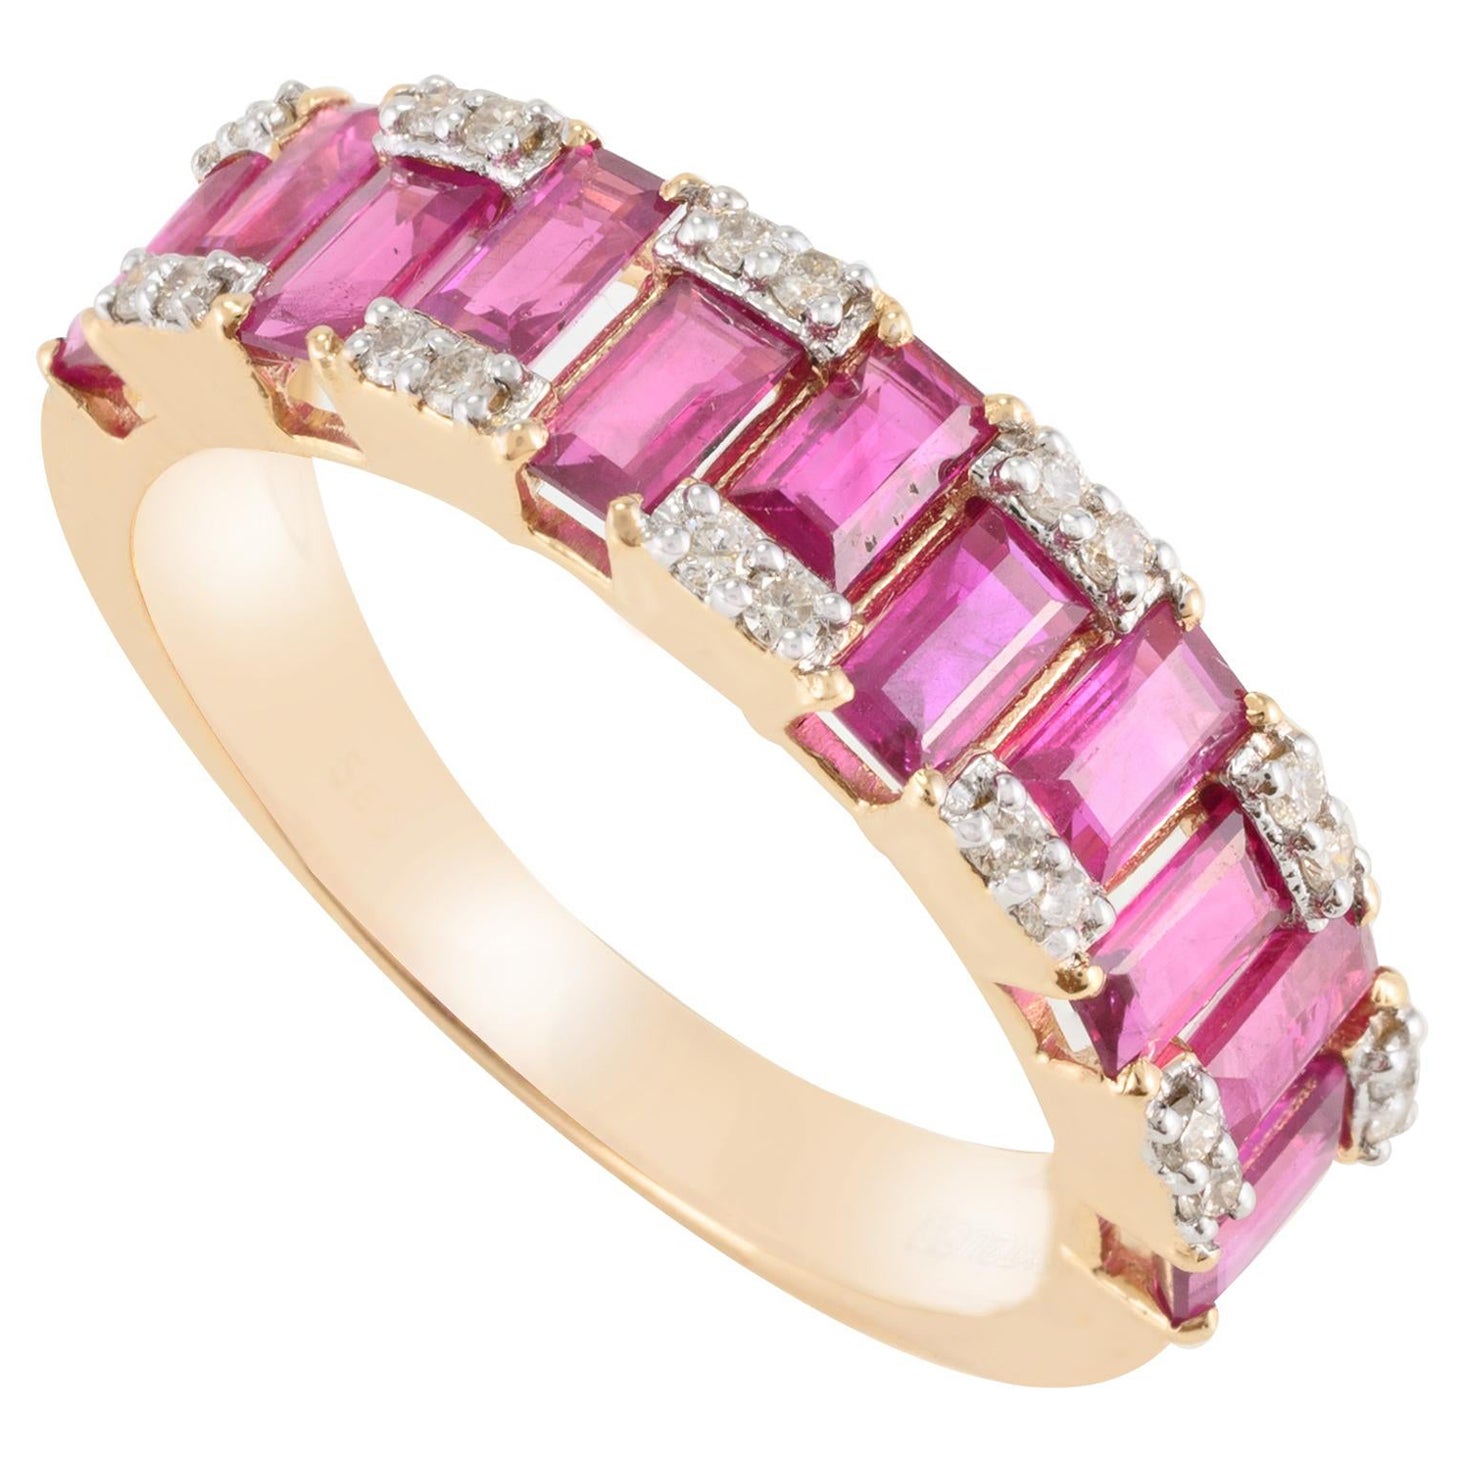 For Sale:  Real Ruby and Diamond Engagement Band Ring in 14k Solid Yellow Gold